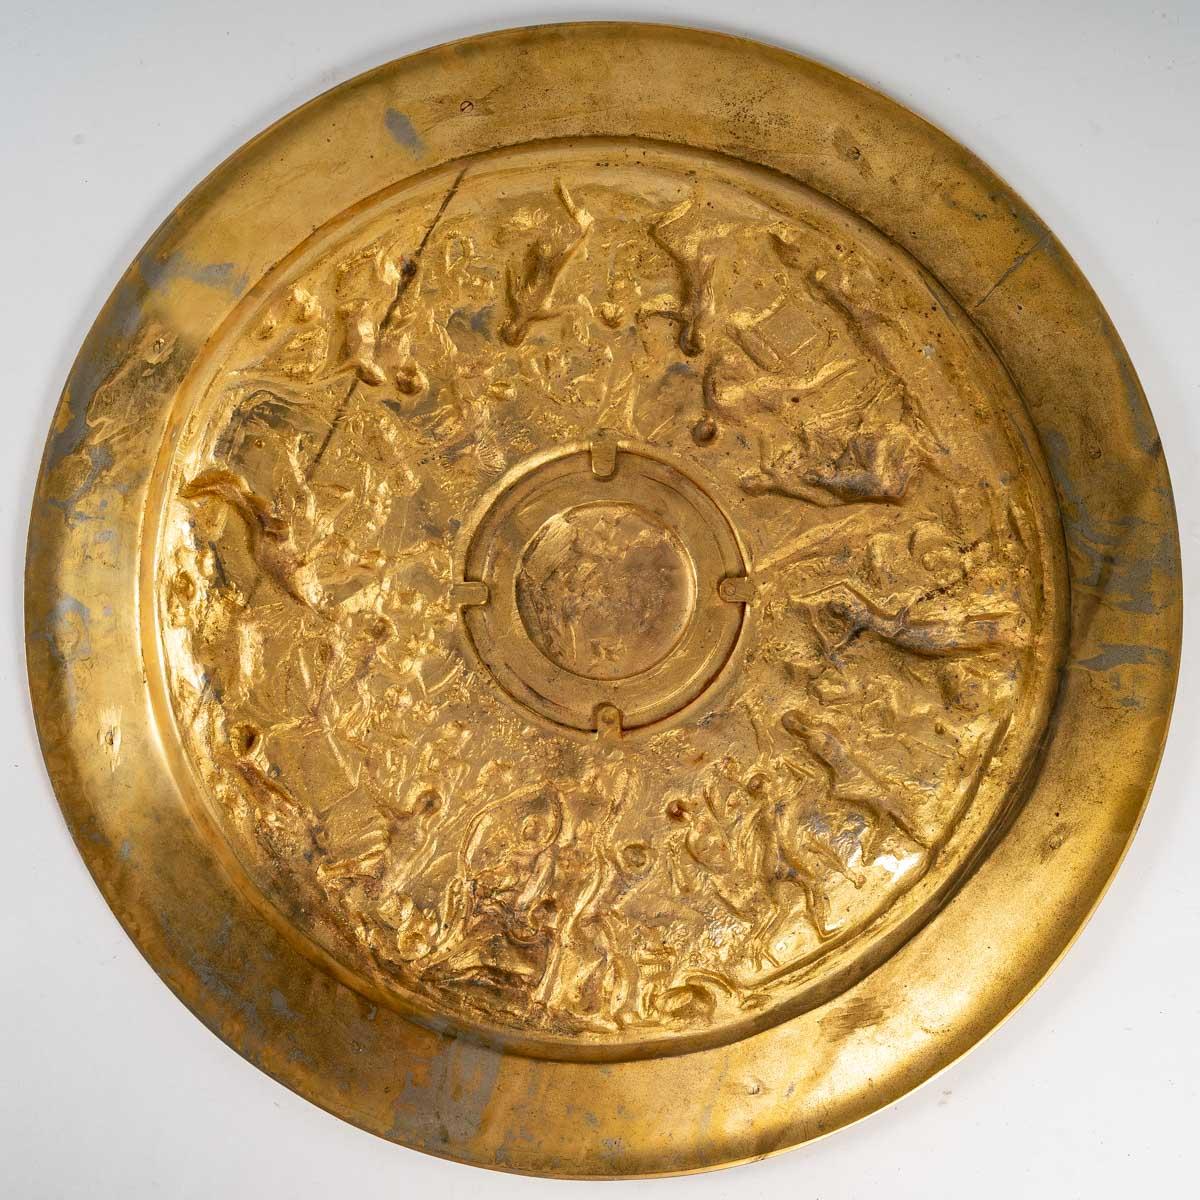 Gilt bronze tray, 19th century
Large gilt bronze tray with bas-relief decoration, 19th century.
H: 3 cm, d: 47 cm.